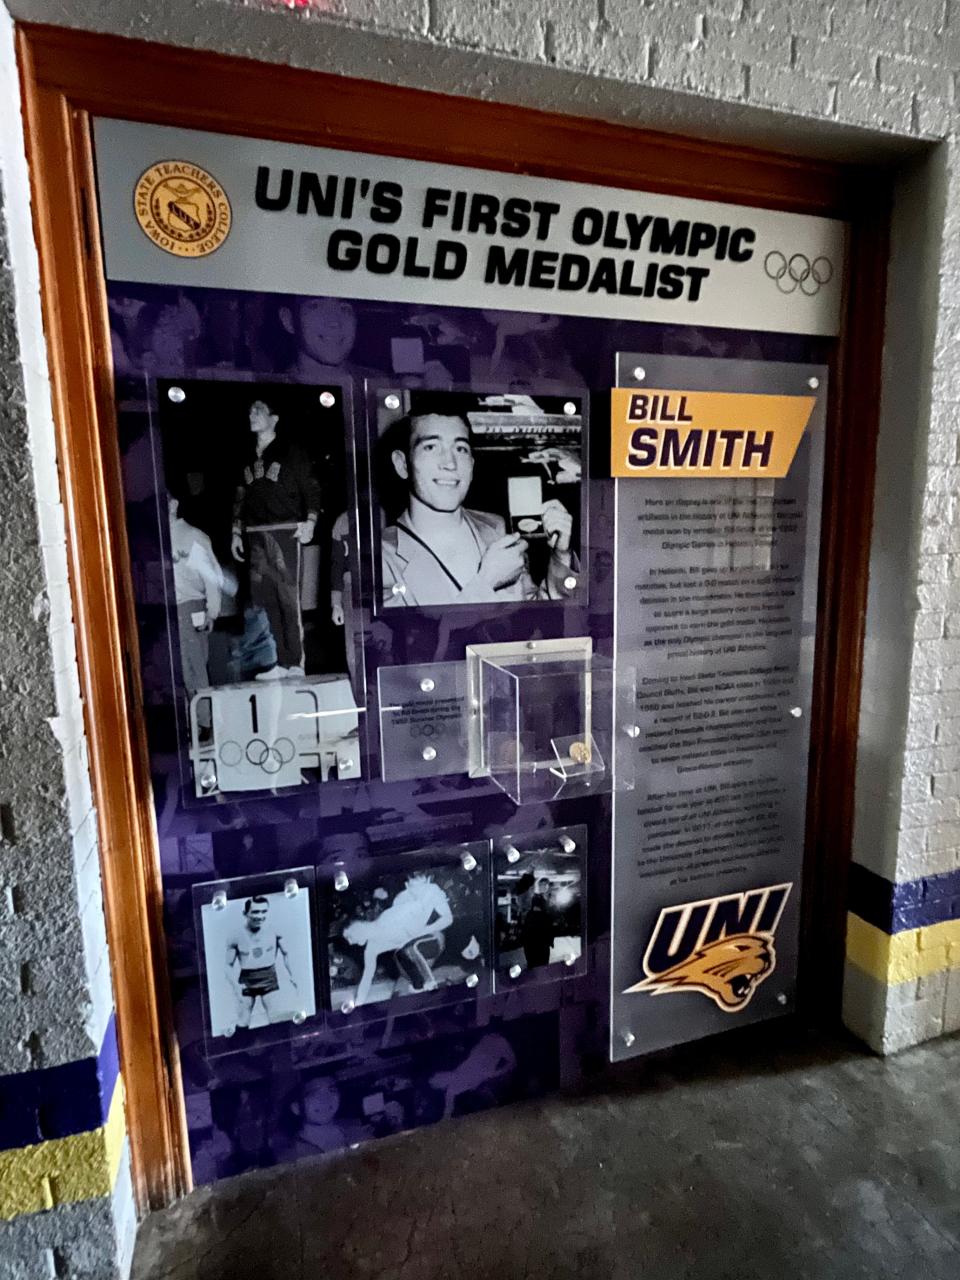 A picture inside Northern Iowa's historic West Gym commemorates Bill Smith, a former Northern Iowa wrestler who won gold at the 1952 Olympics in Helsinki.